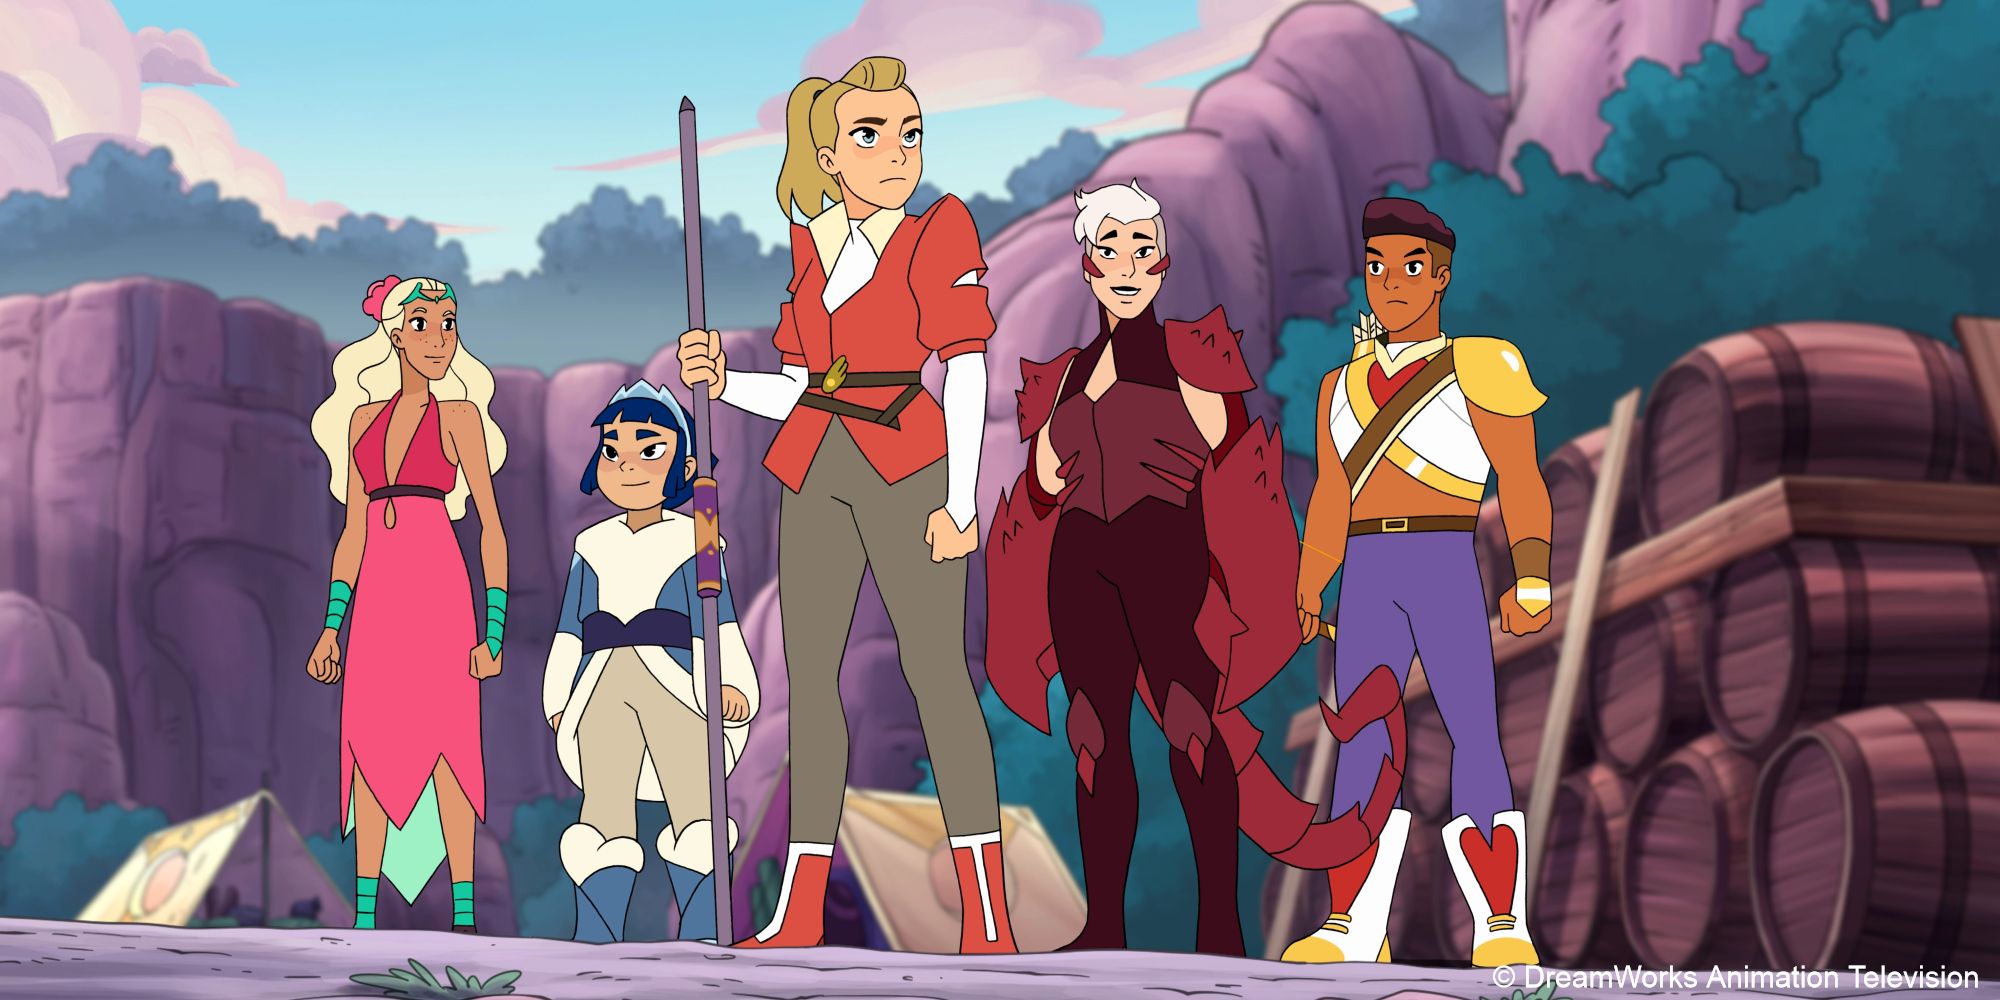 Perfuma, Frosta, Adora, Scorpia, and Bow stand together on a plane, looking defiant and brave